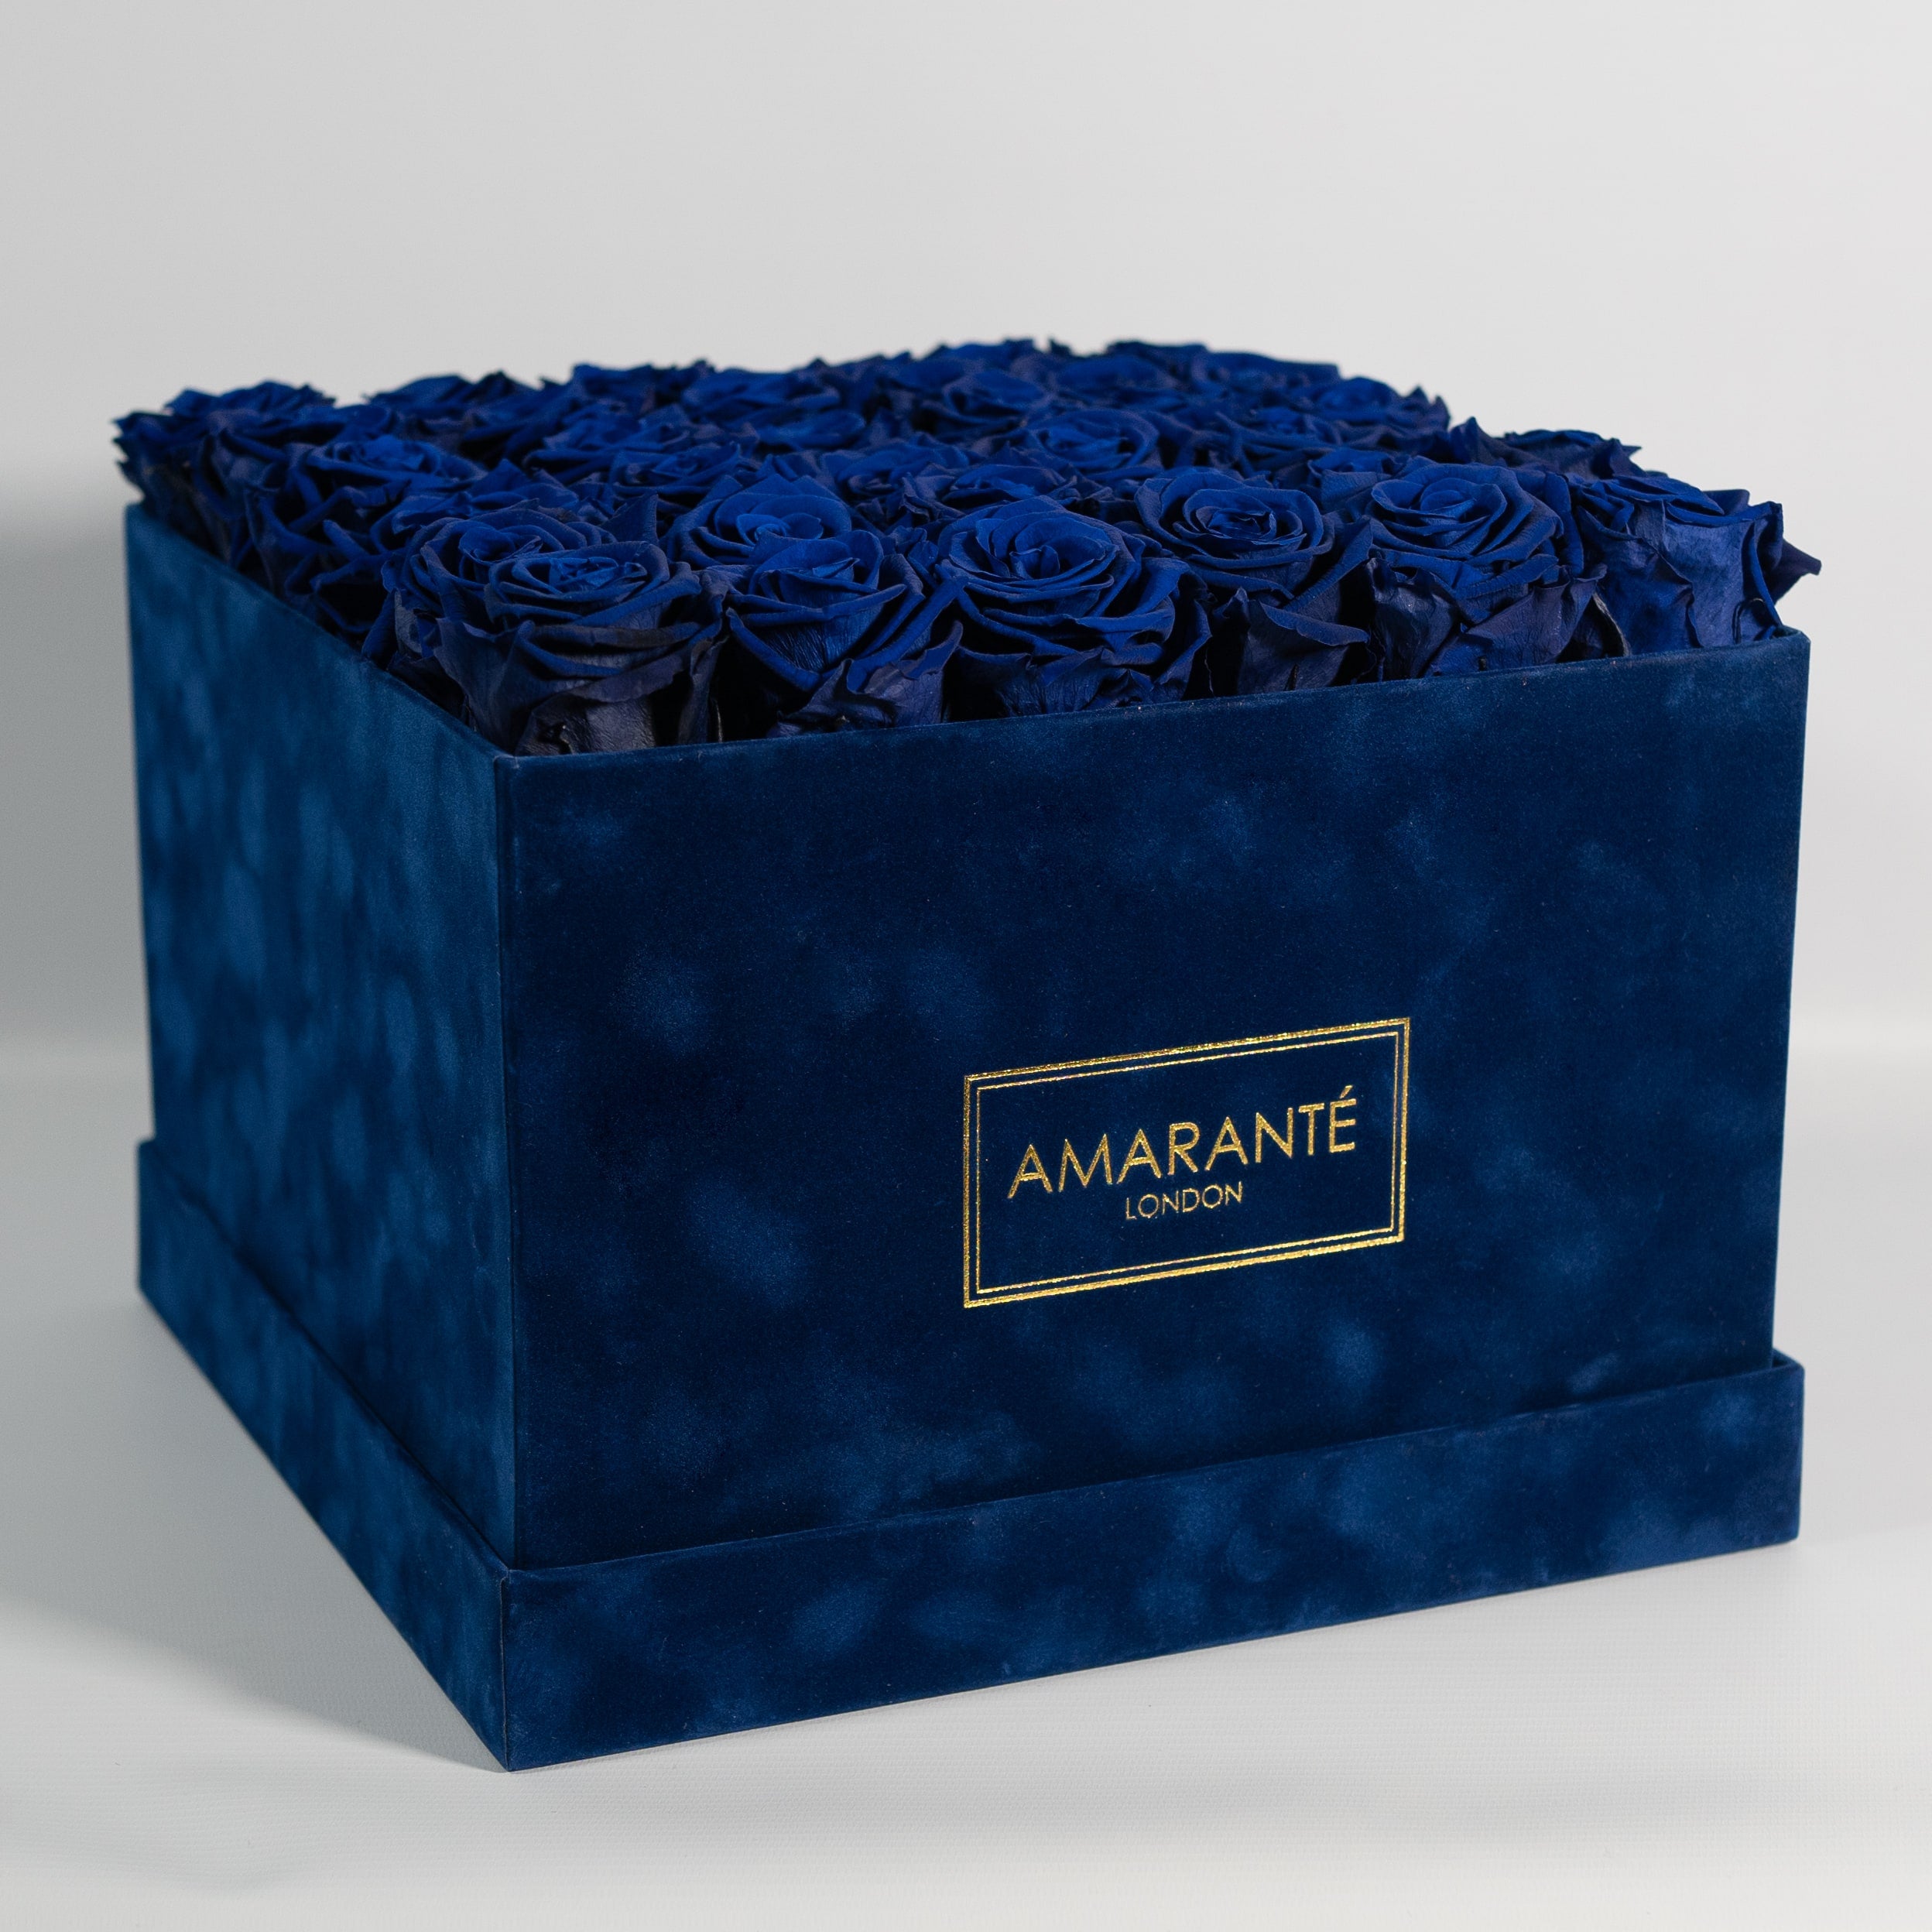 Majestic Royal blue Roses, connoting luxury, royalty, and security. 